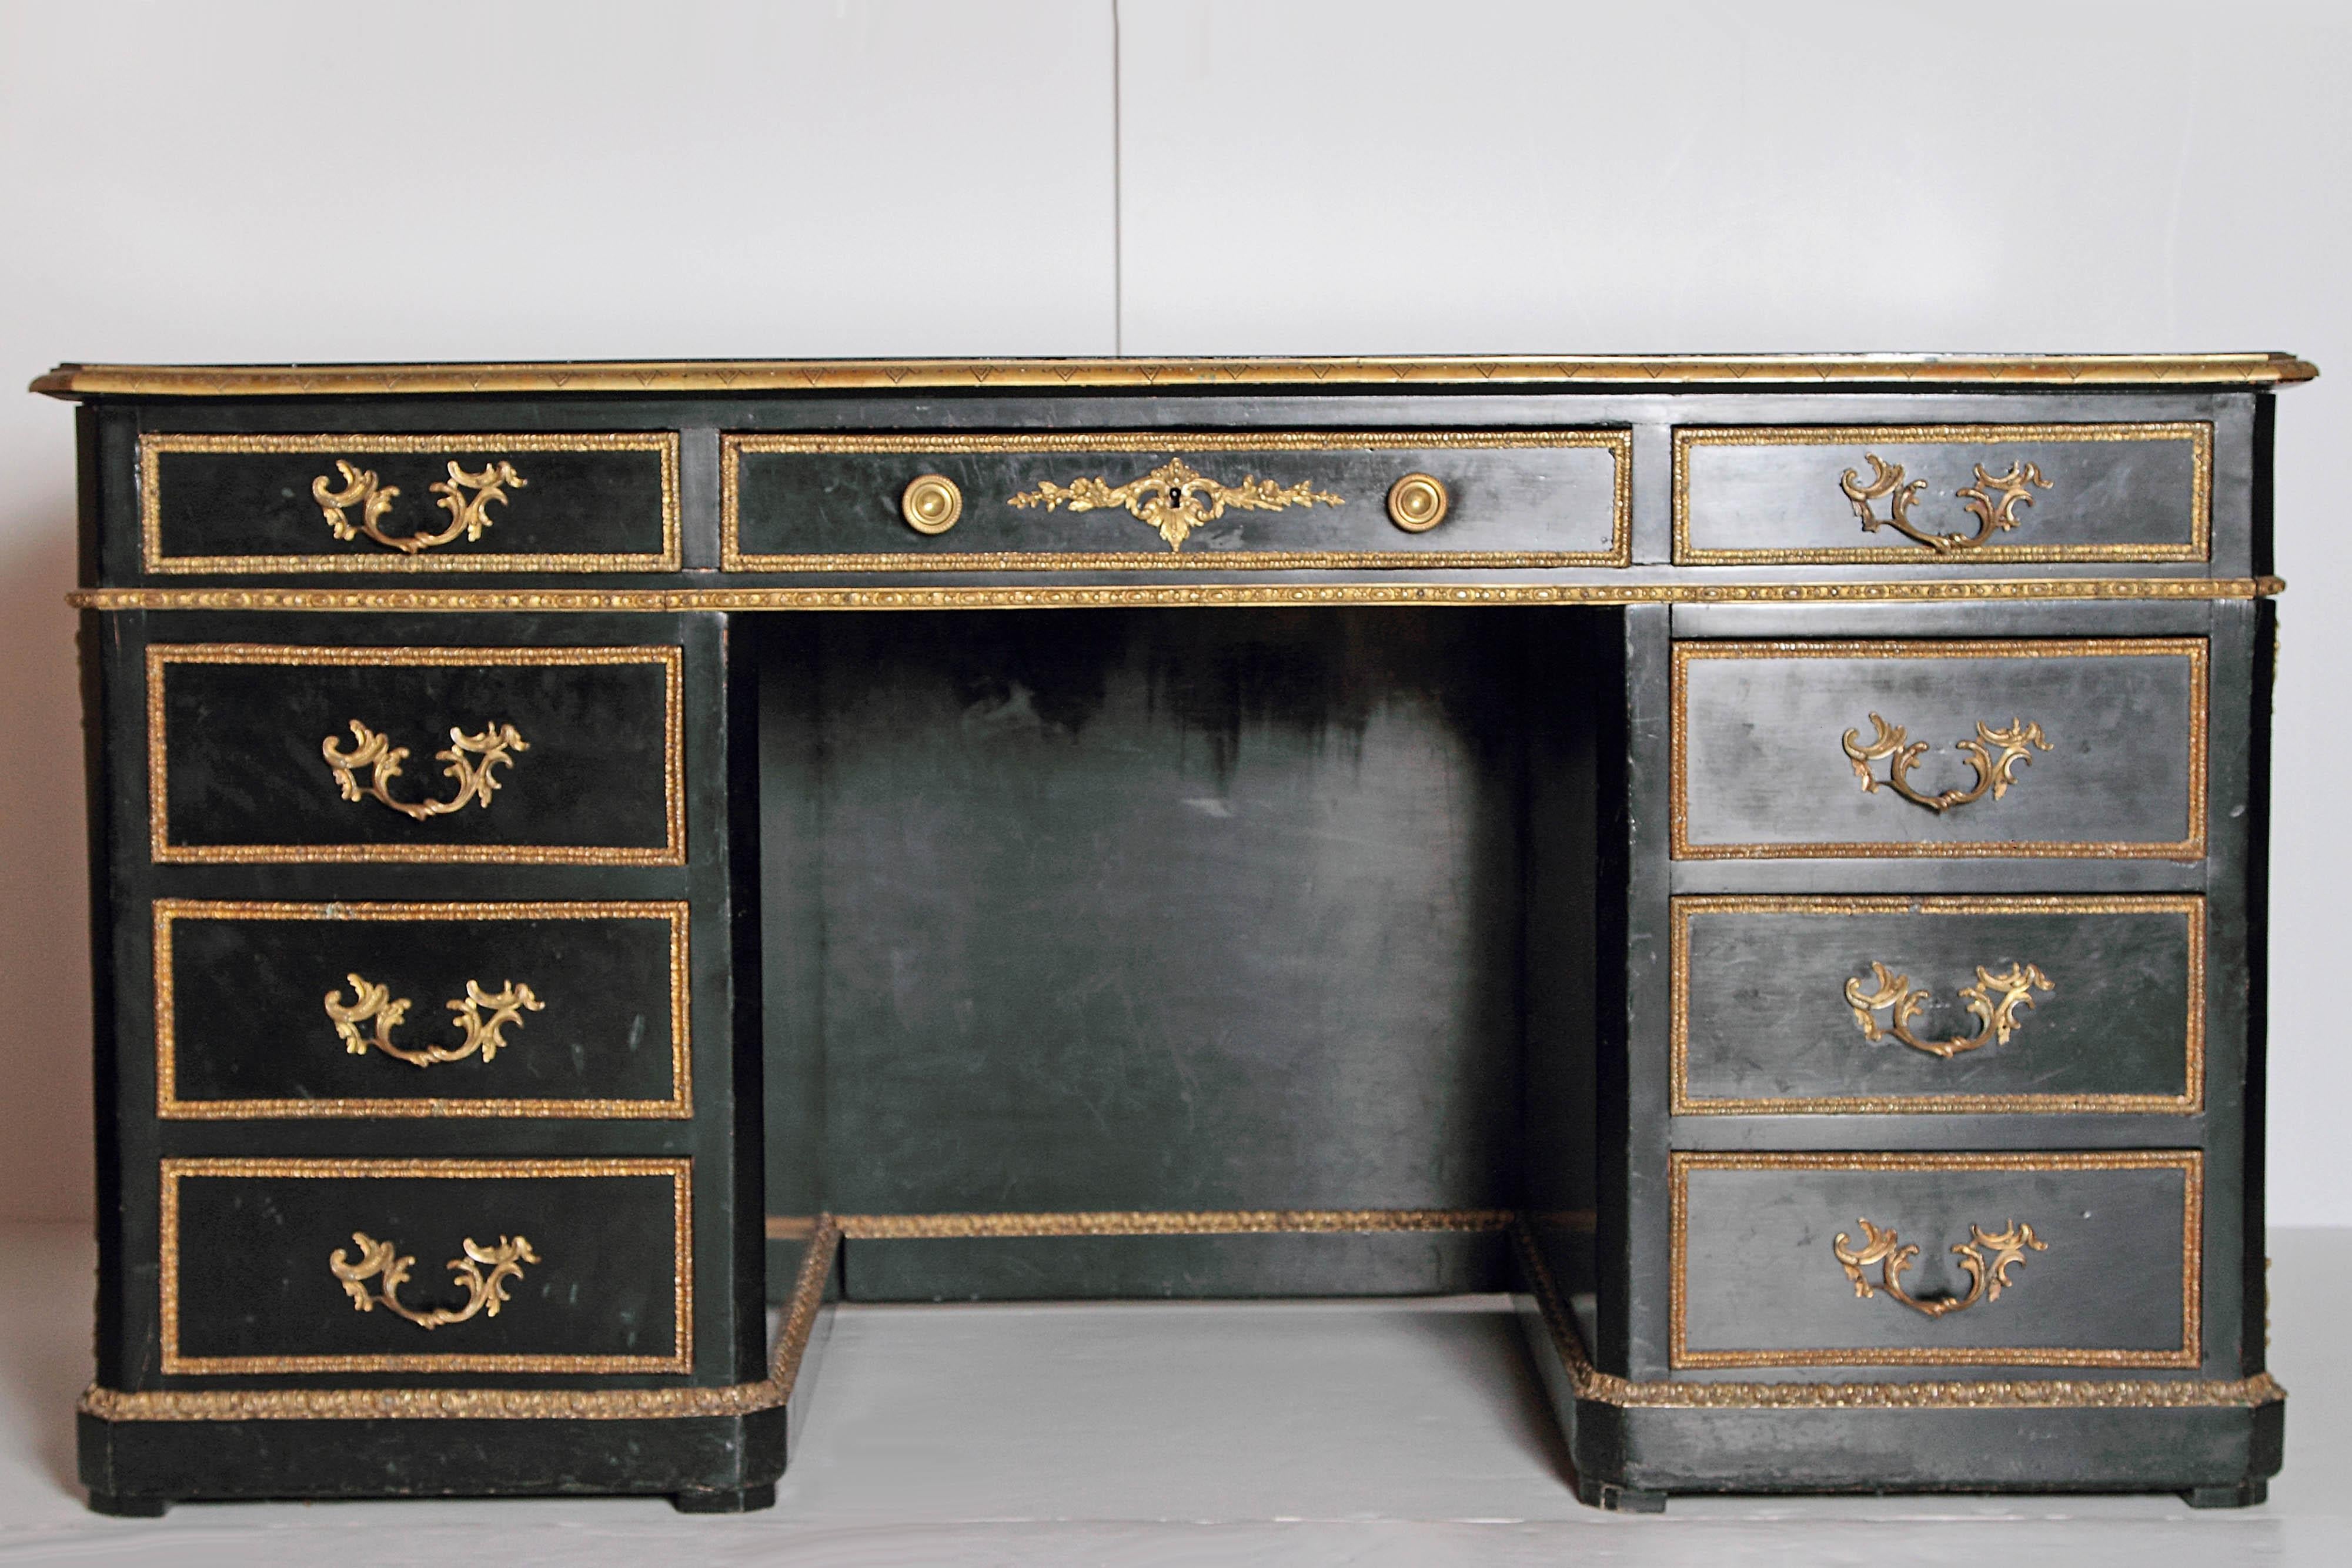 Ebonized 19th century French Regence style desk with gilt bronze mounts including satyr masks on each end and on the back. Black leather writing surface with embossing measures 52